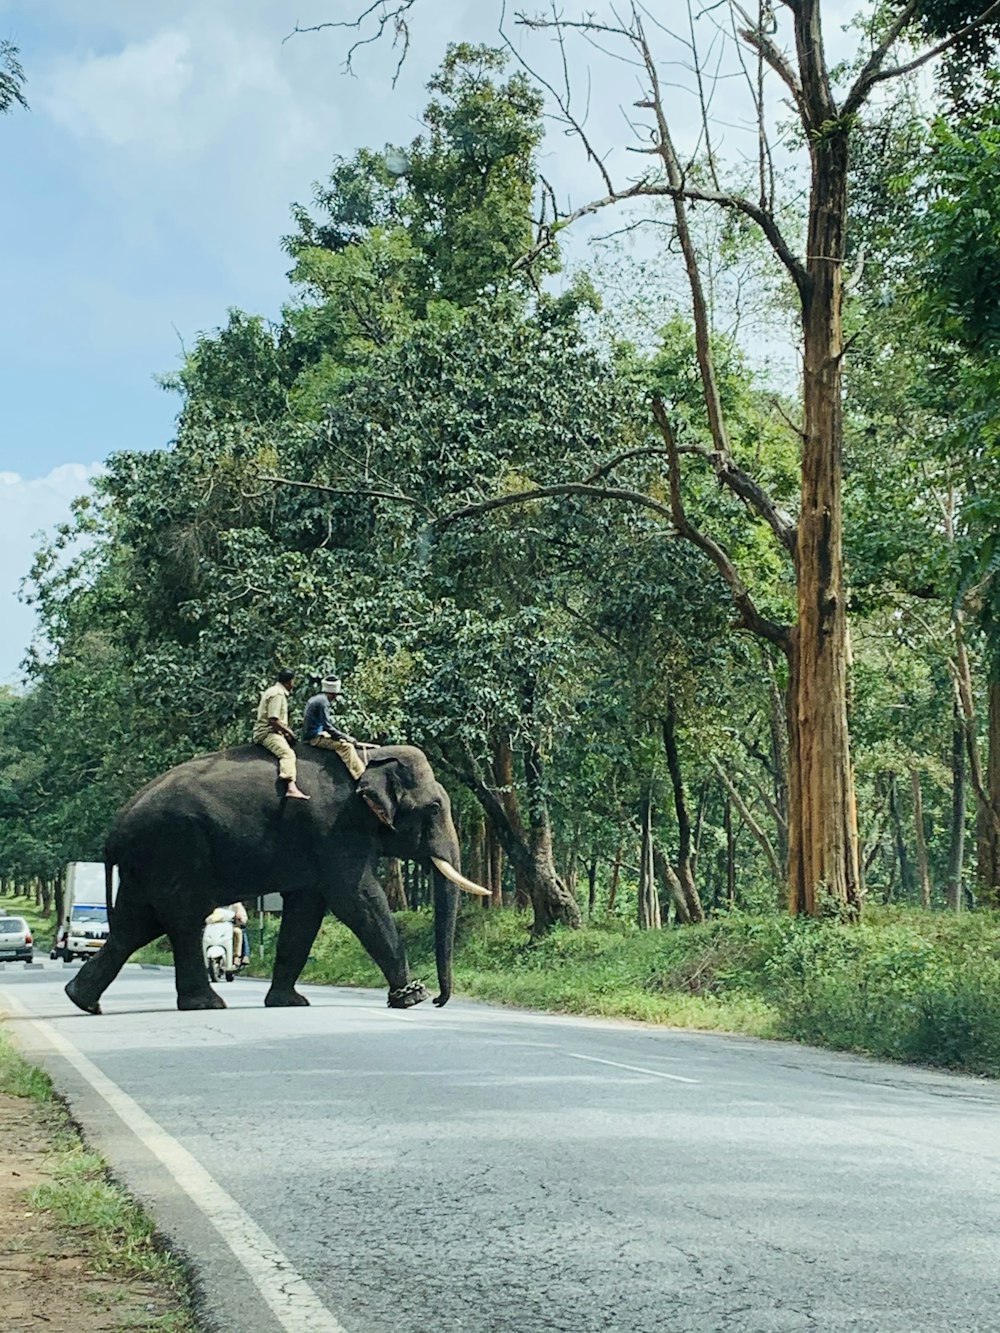 man riding elephant on road during daytime